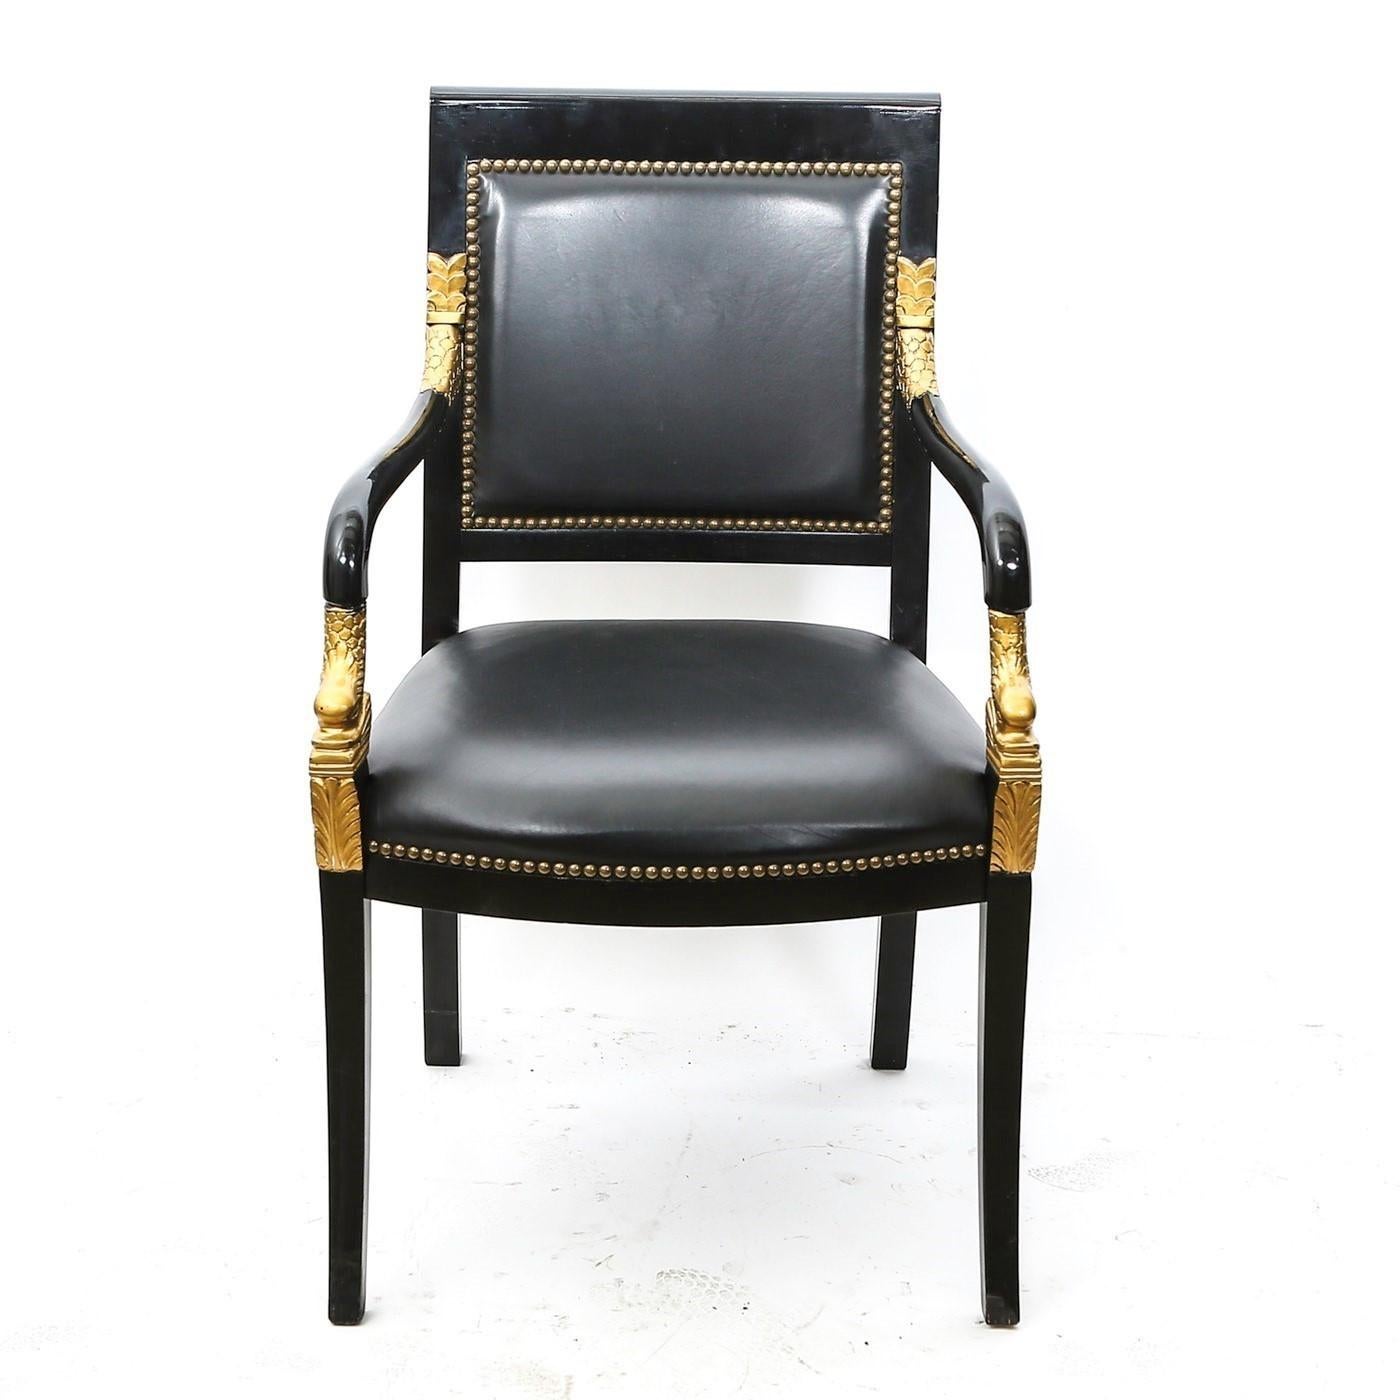 This lovely pair of Empire armchairs with rather majestic lines. Featuring frames made of mahogany wood professionally lacquered in black. Consists of a large flat or slightly curved upholstered backrest over an upholstered seat which is joined by